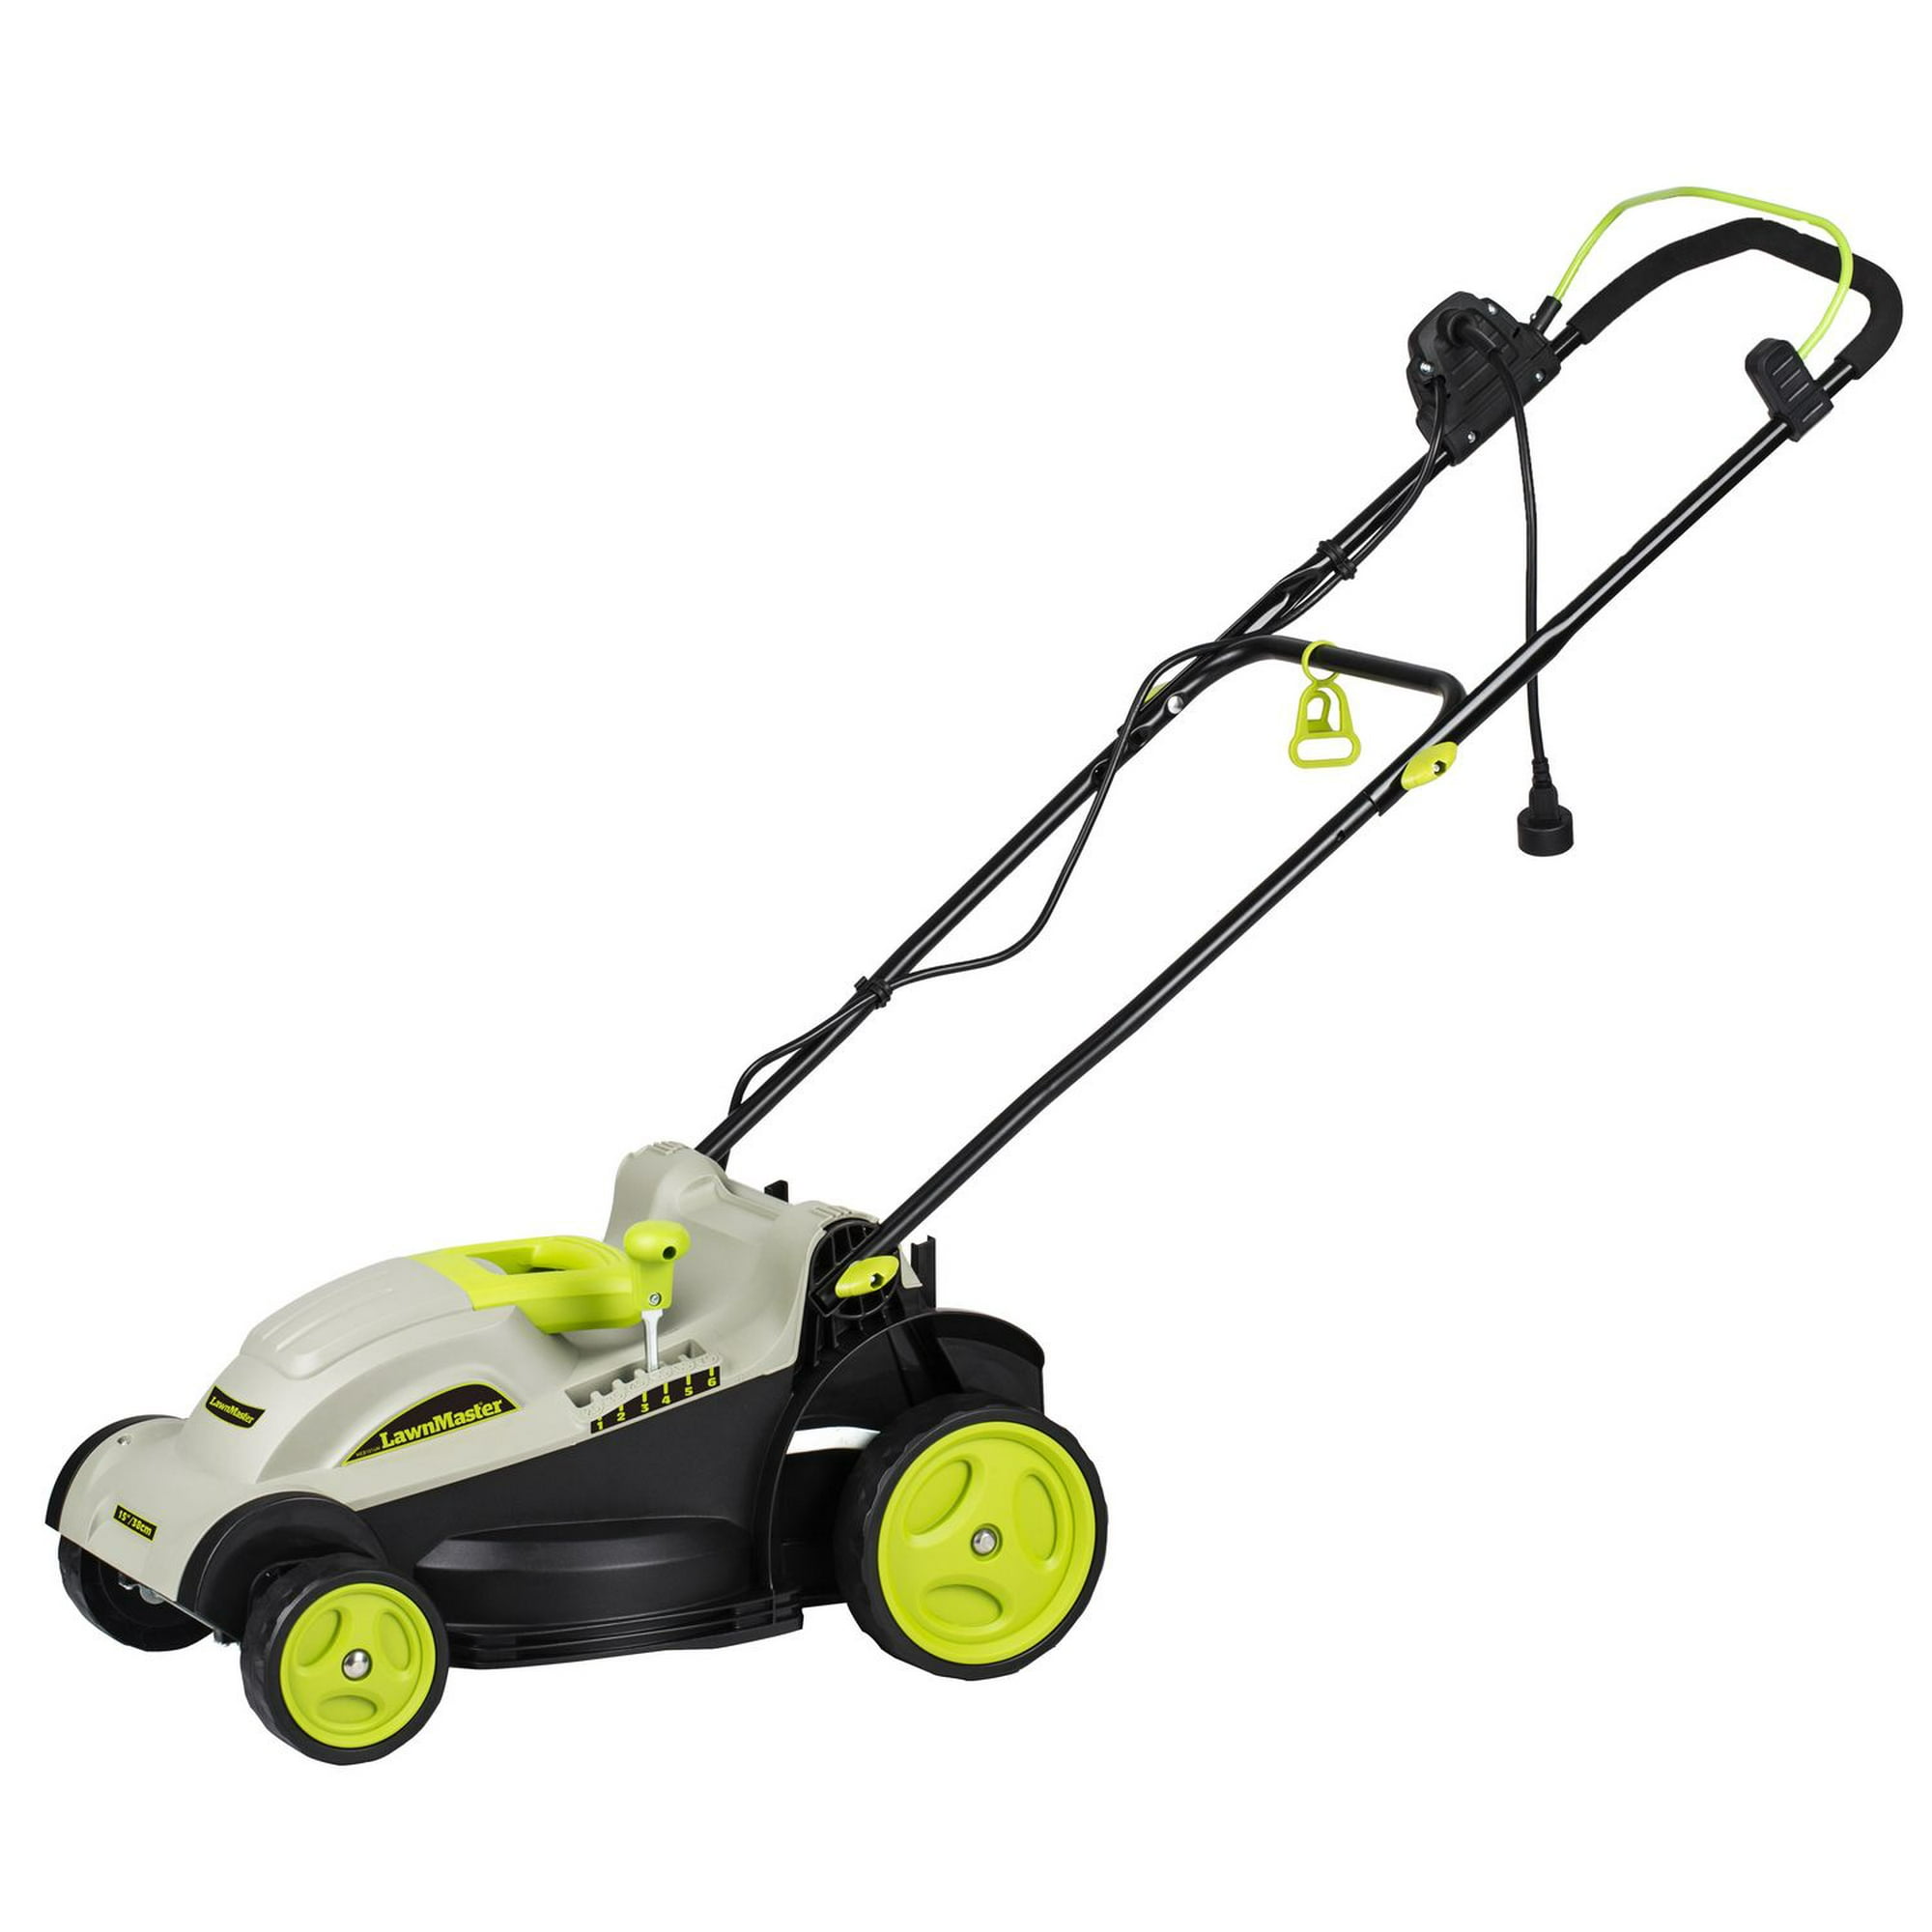 Topbuy Electric Lawn Mower 2-in-1 Versatile Corded Lawn Mower with Grass  Collection Box 10 AMP Motor